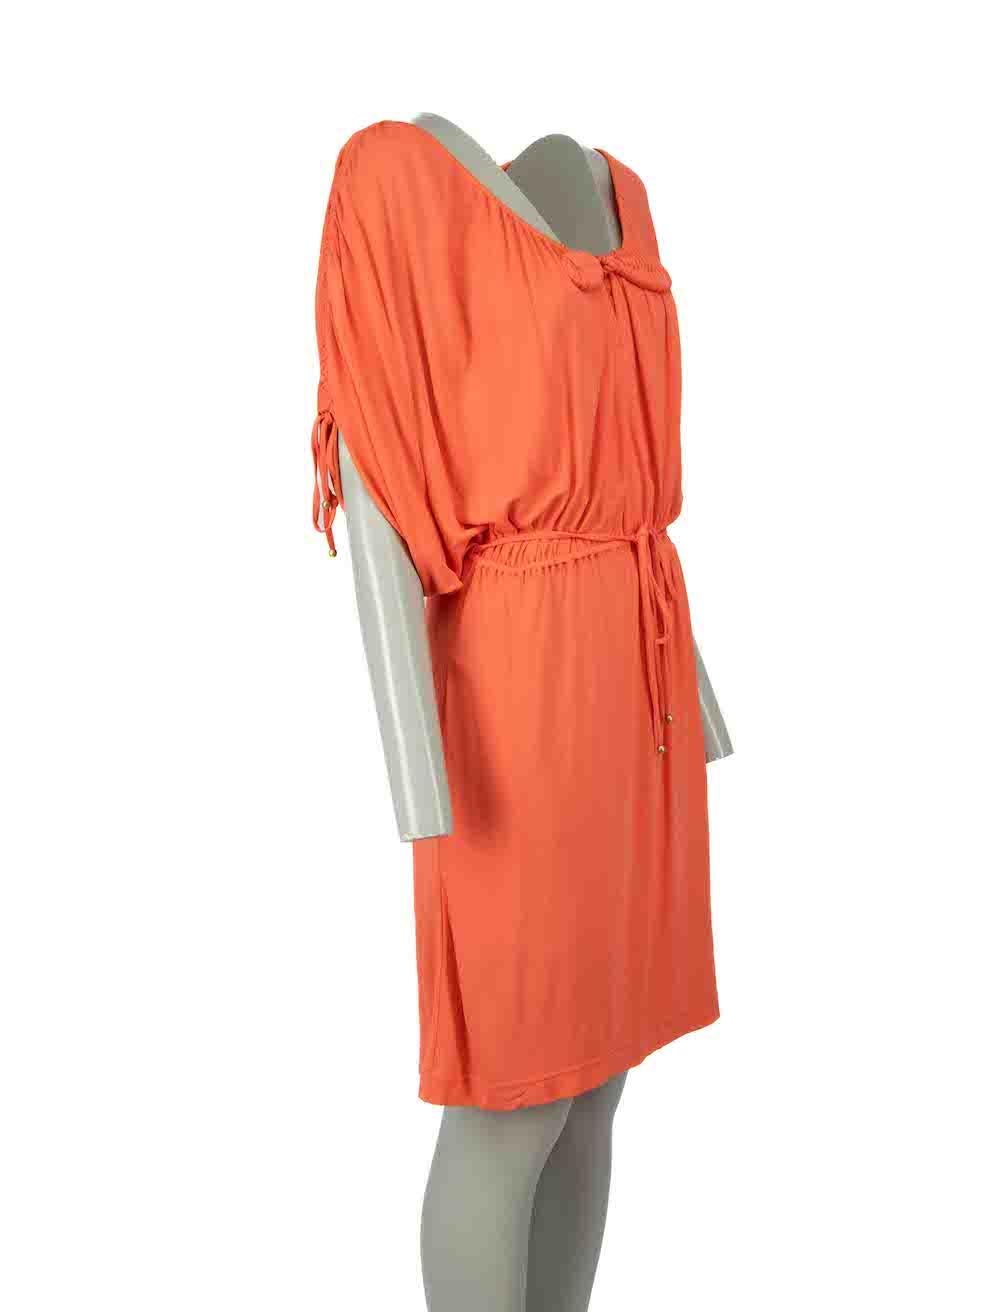 CONDITION is Very good. Minimal wear to dress is evident. Minimal wear to front of dress with small mark and right shoulder with loose seam on this used Temperley London designer resale item. This item comes with slip under dress.
